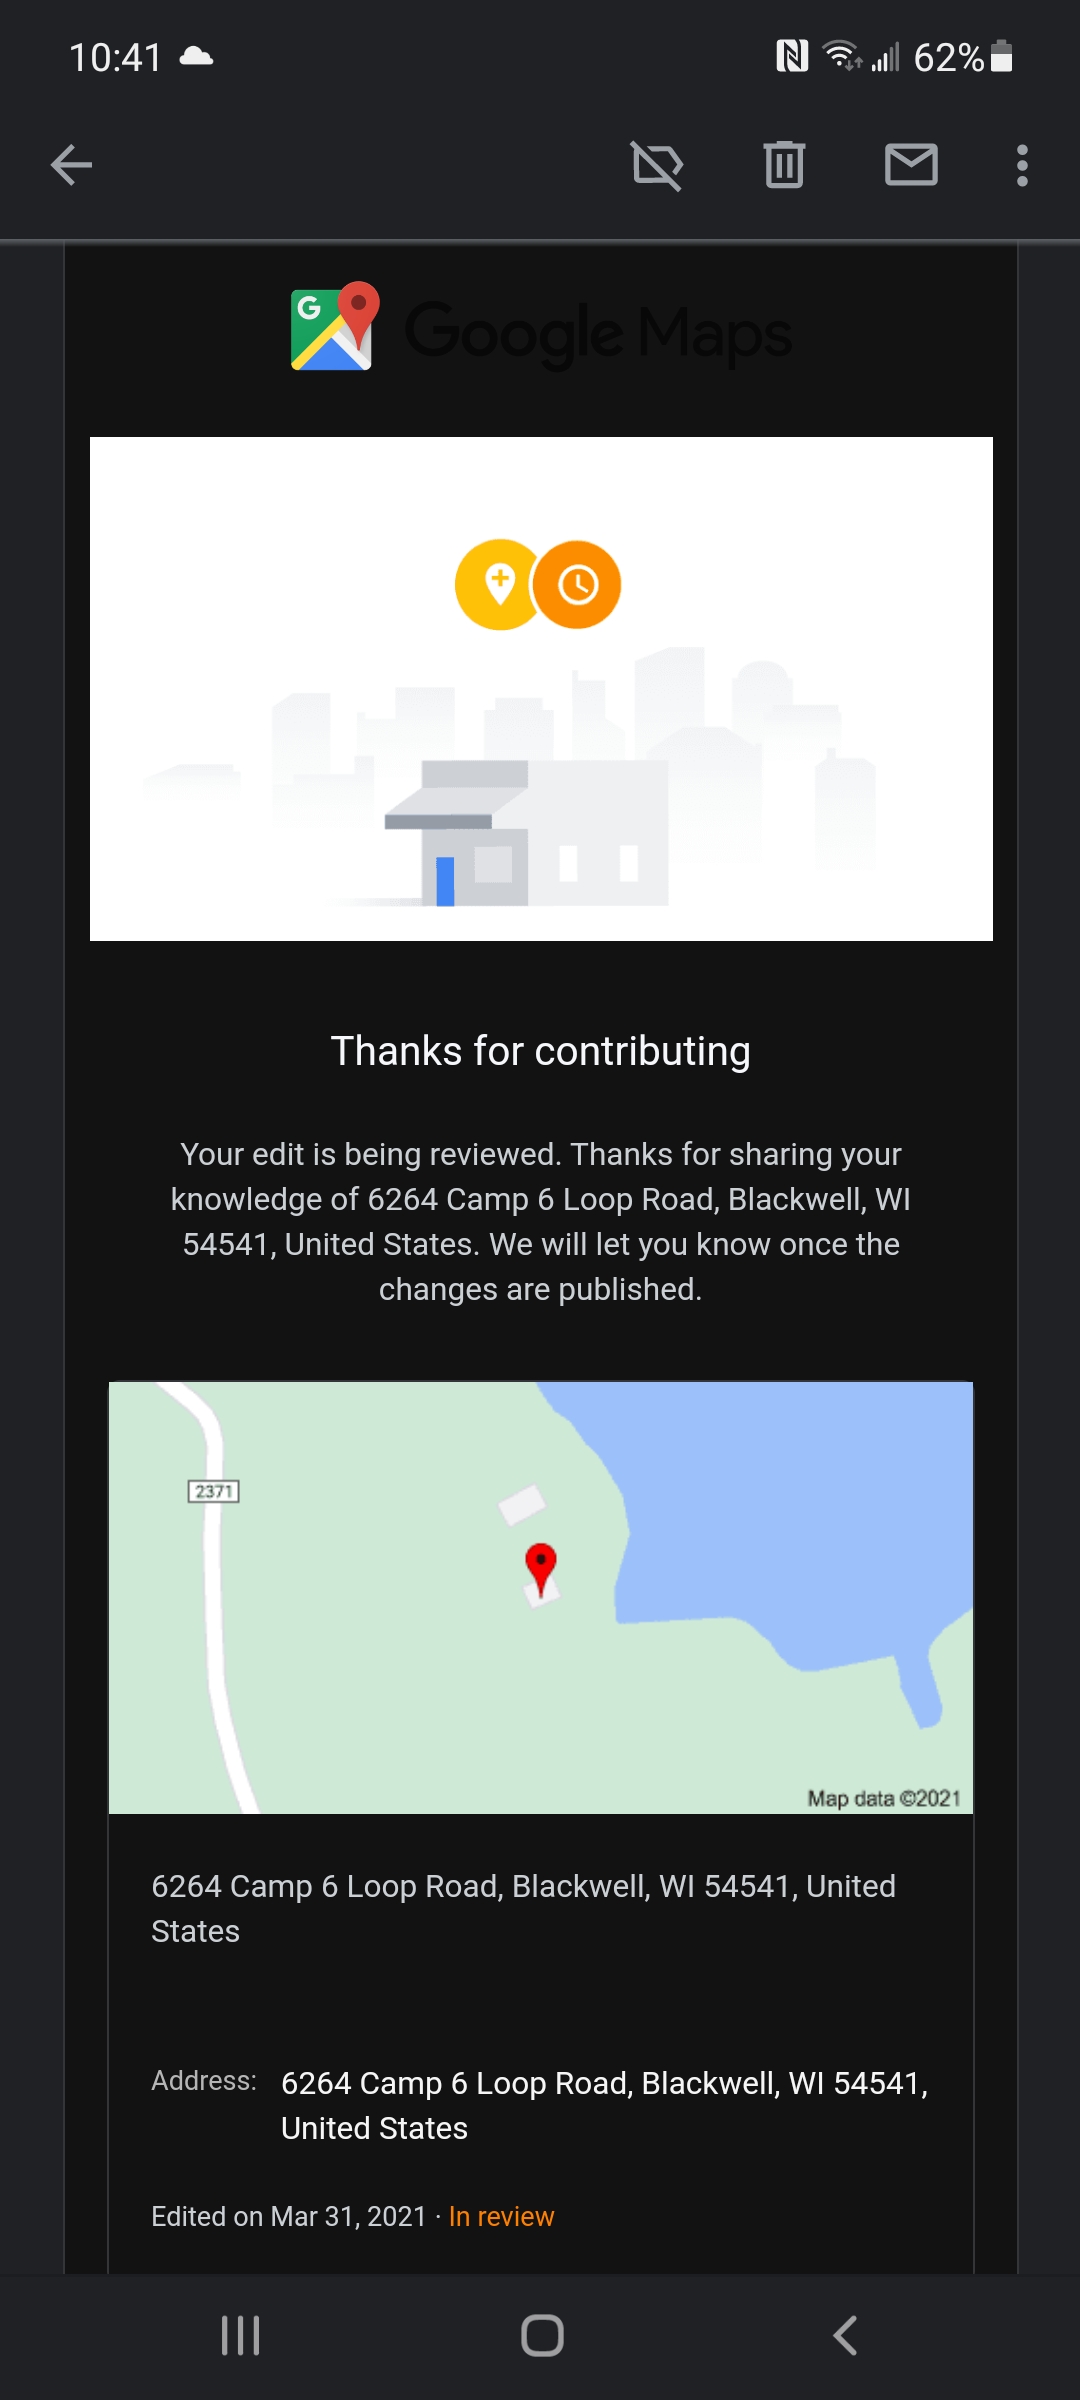 How long does it take a suggested edit to google maps to be approved? Still  waiting for approval. - Google Maps Community